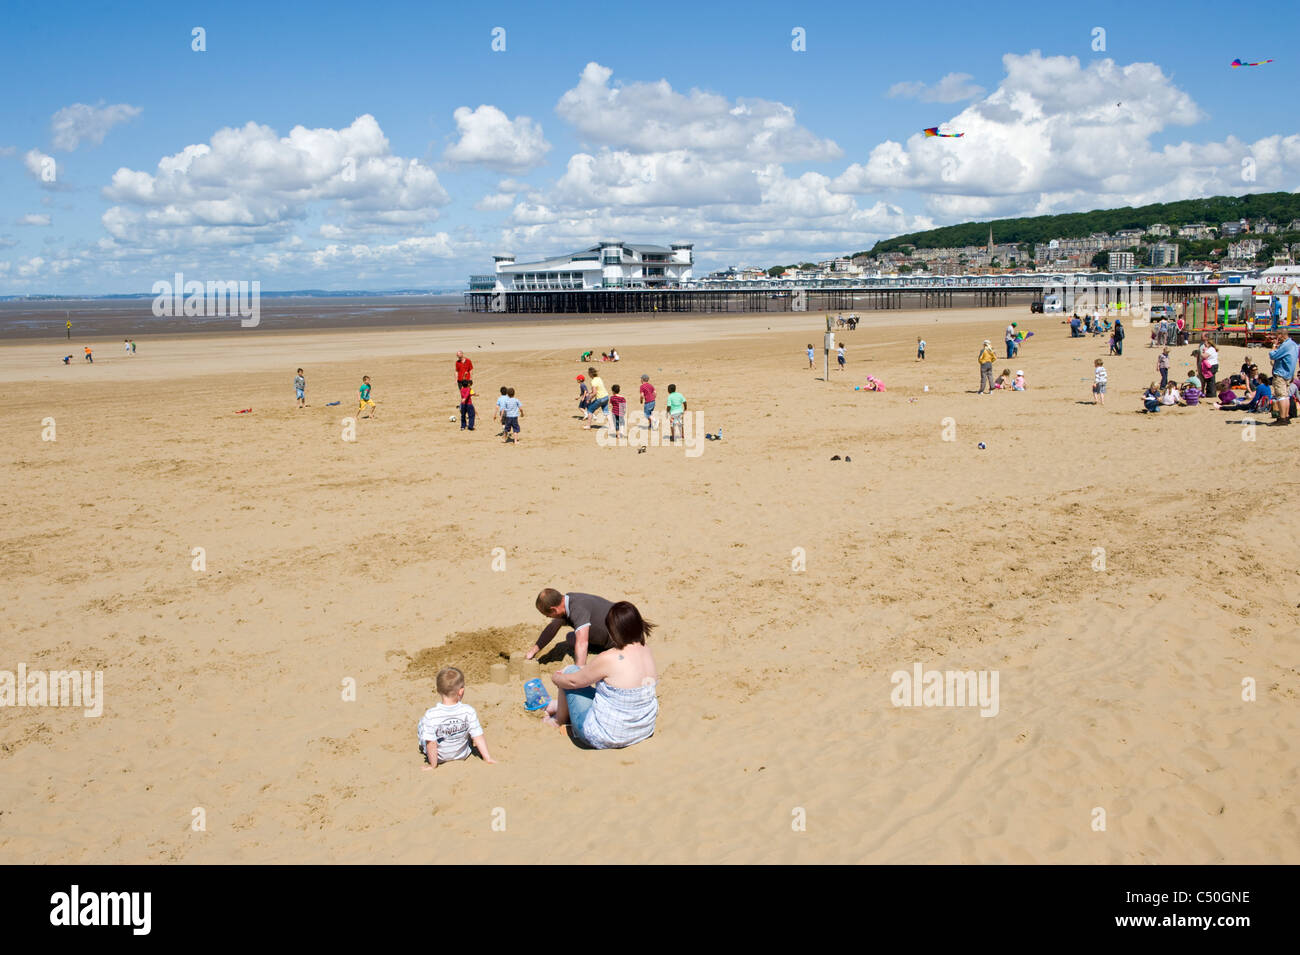 Family groups on the sand beach with pier in background at Weston Super Mare Somerset England UK Stock Photo